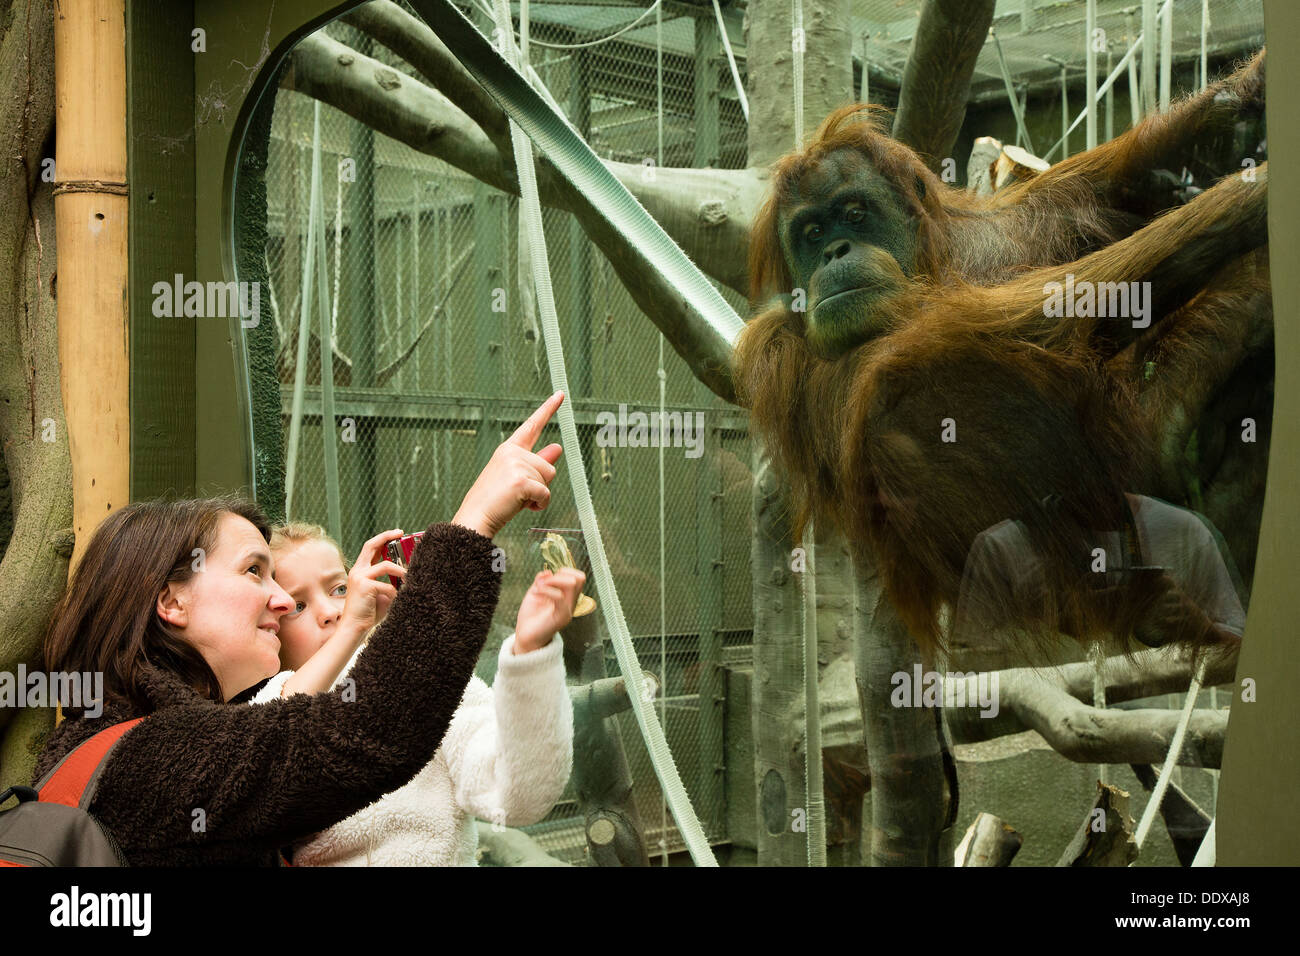 Woman and child watching and photographing an orangutan at Chester Zoo Stock Photo